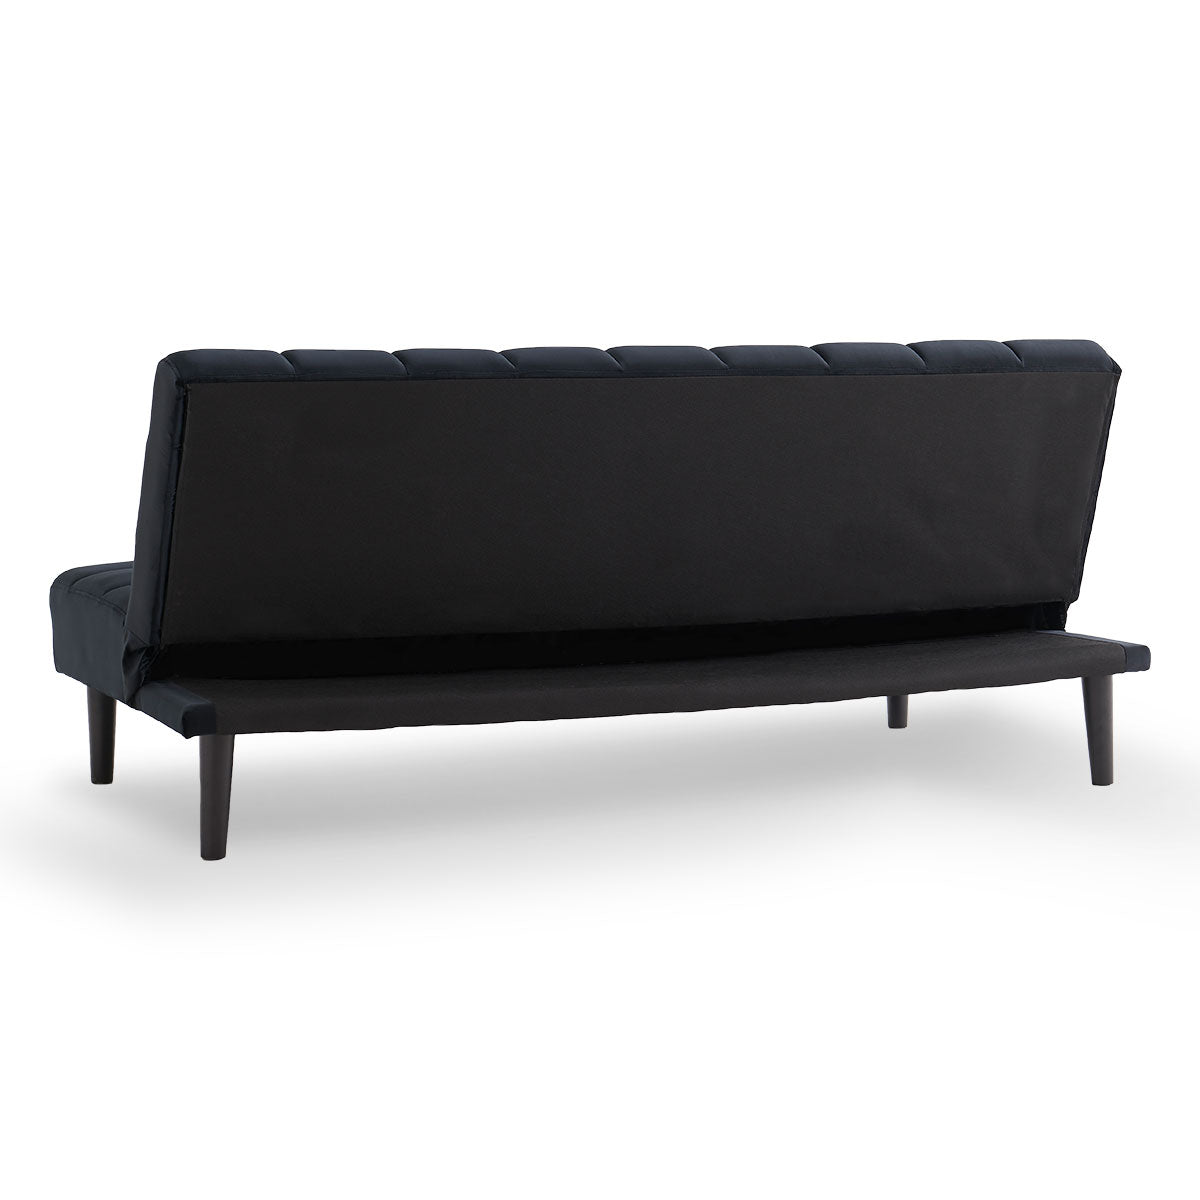 Marlena 3-Seater Faux Suede Fabric Sofa Bed Lounge - Black